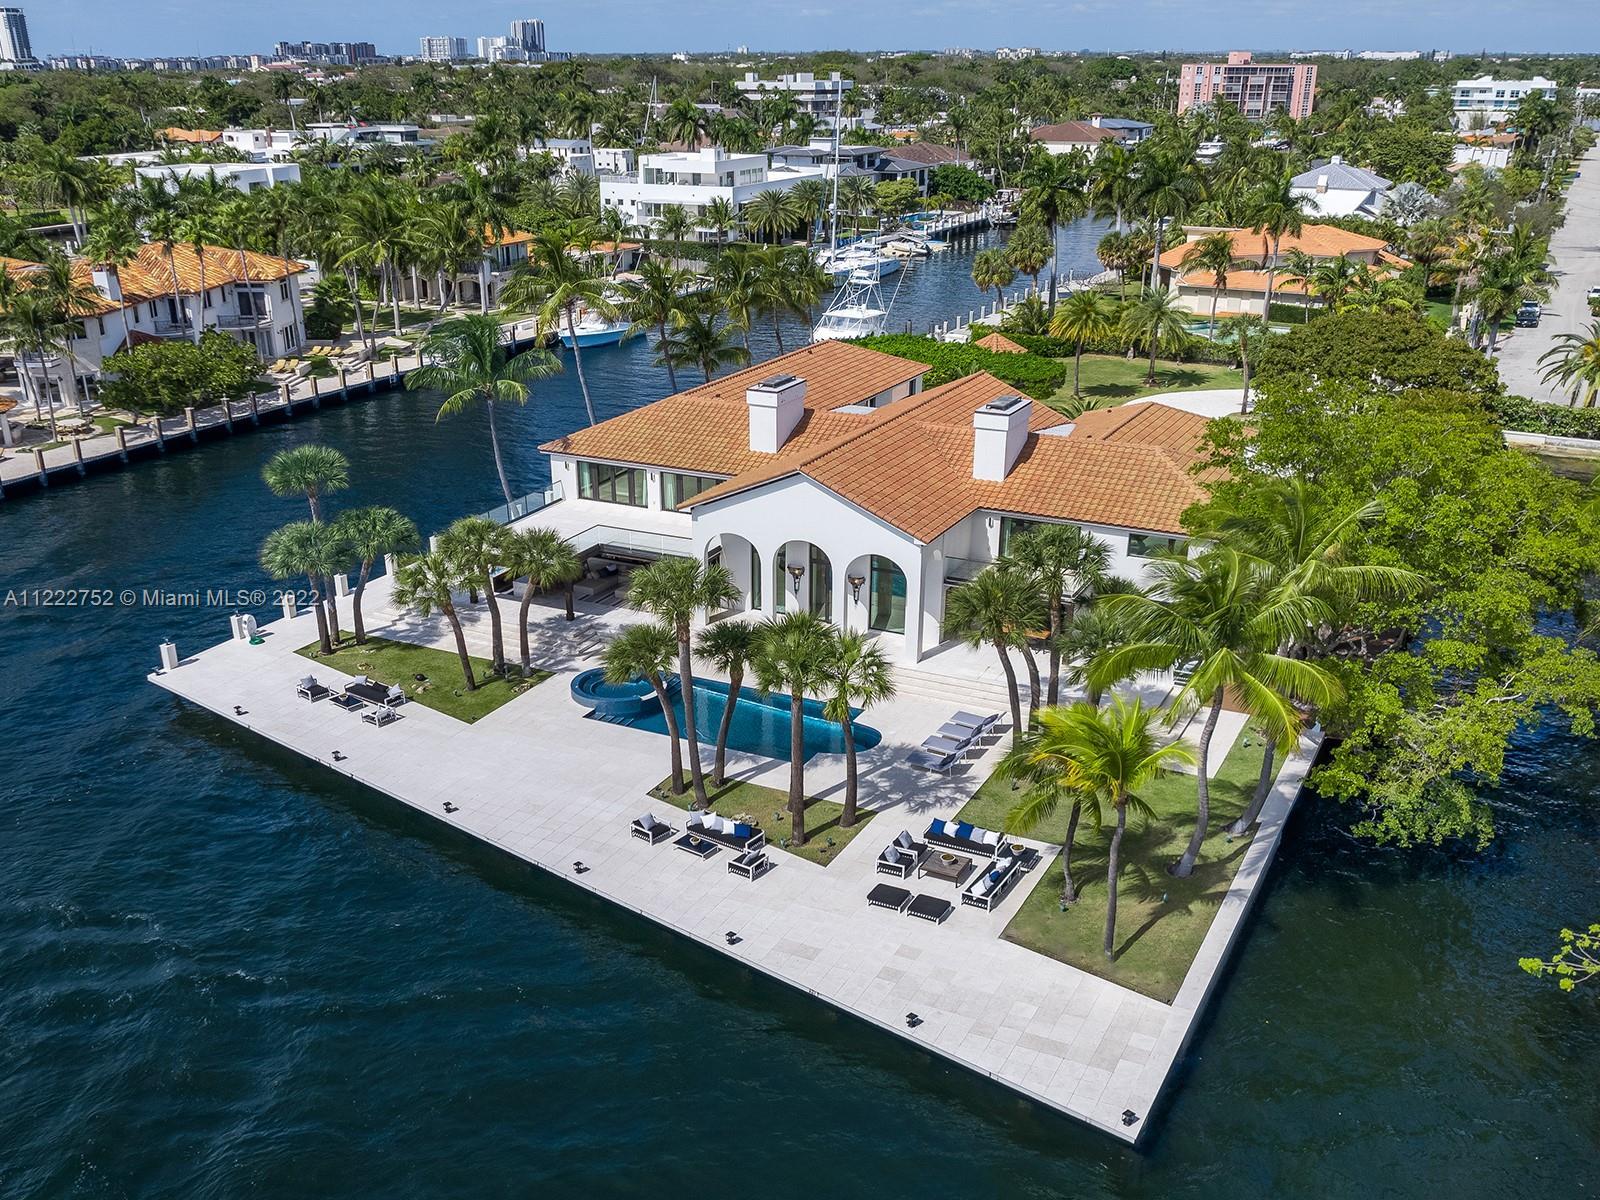 This Las Olas Isles estate has the rare distinction of occupying its own private peninsula, with spe